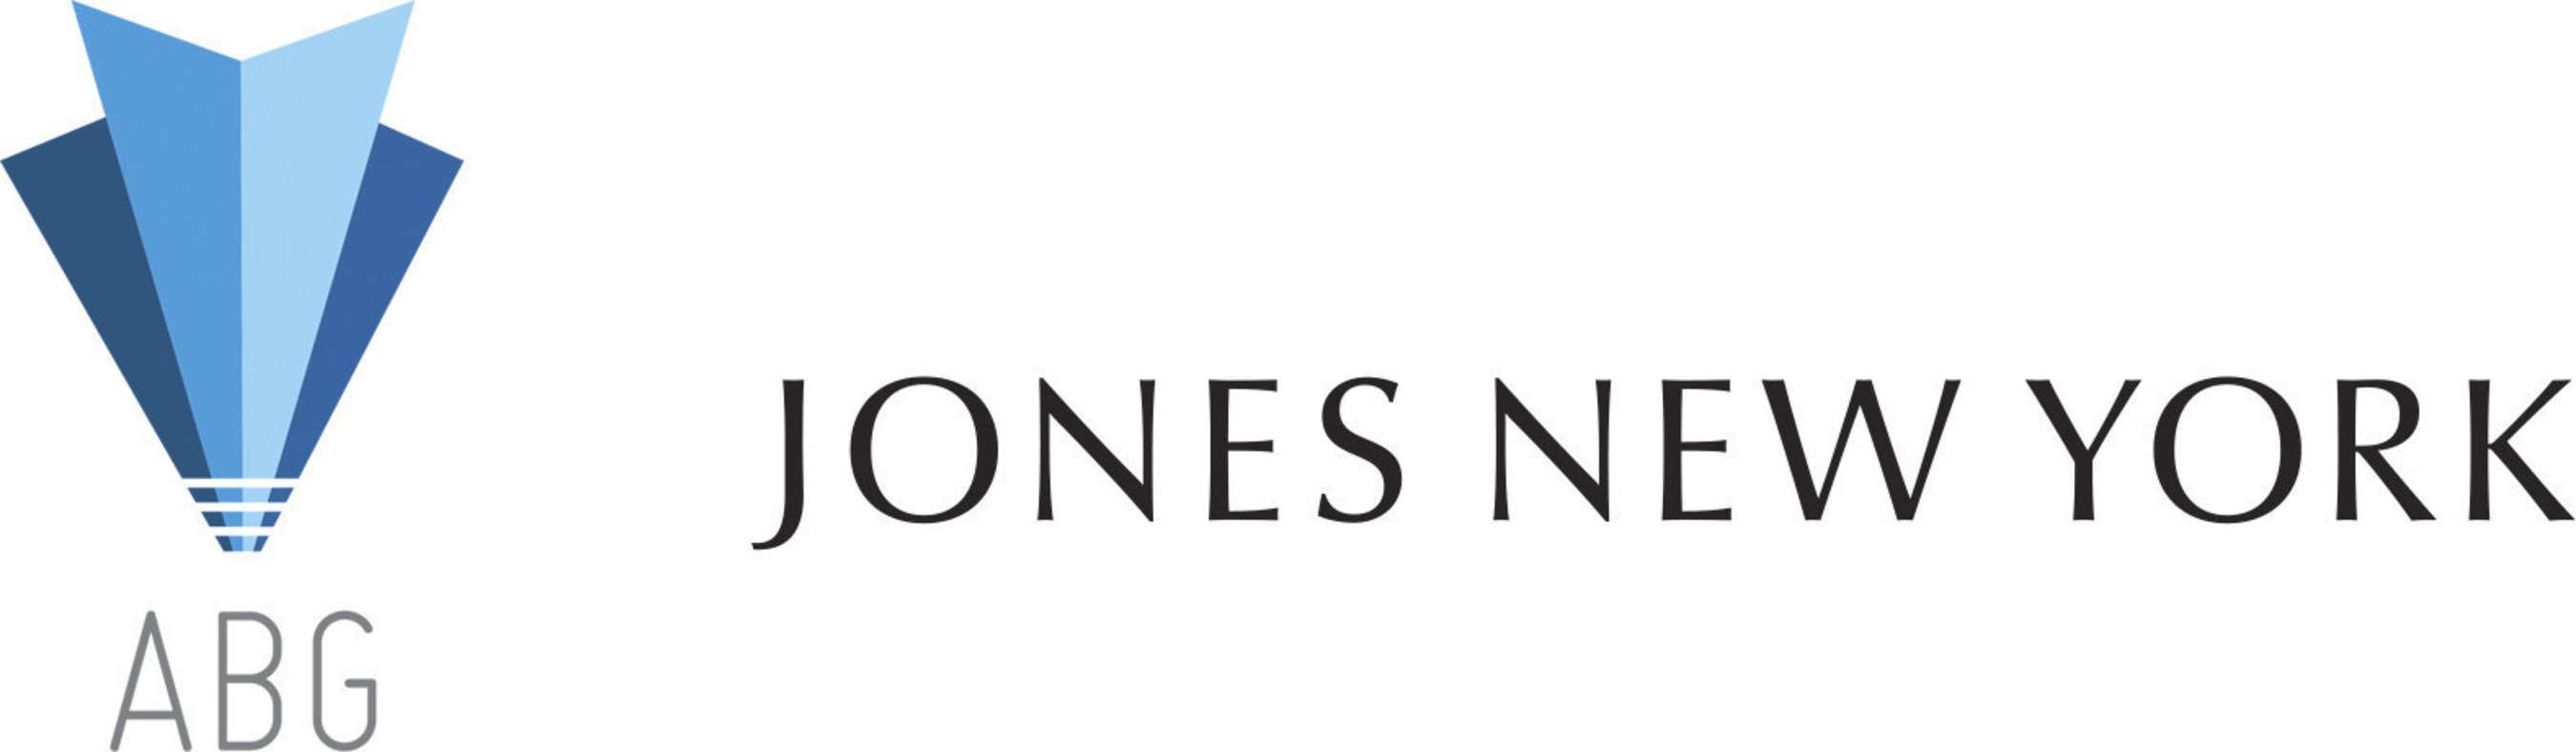 ABG Acquires Jones New York And Taps Mark Weber, Former CEO LVMH